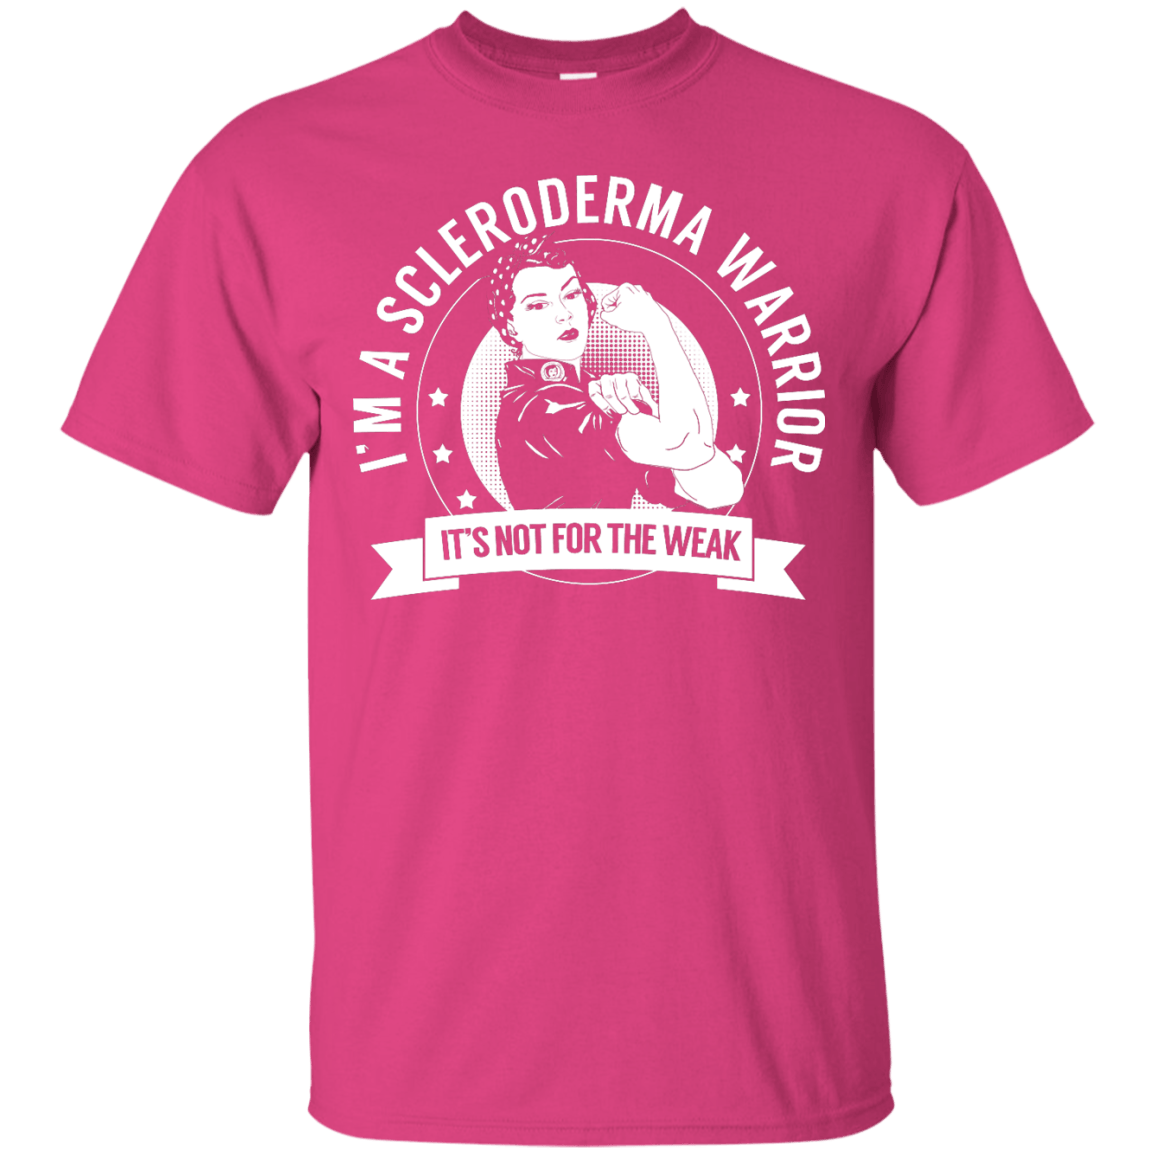 Scleroderma Warrior Not For The Weak Unisex Shirt - The Unchargeables